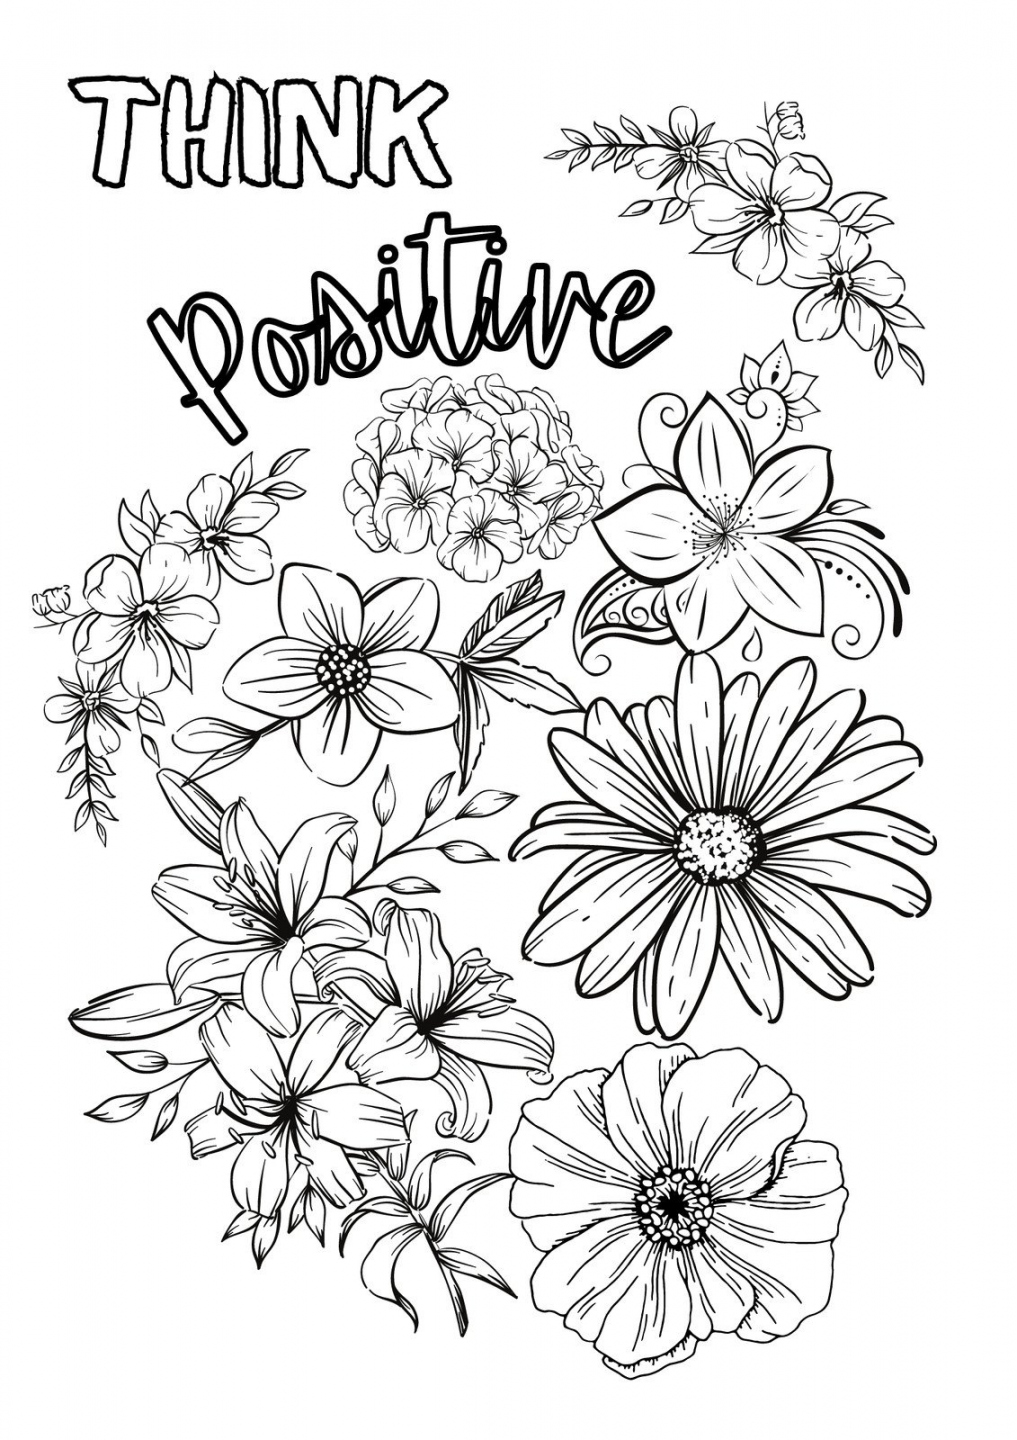 Coloring Sheets Free Printable - Printable - Free printable coloring page templates to customize  Canva